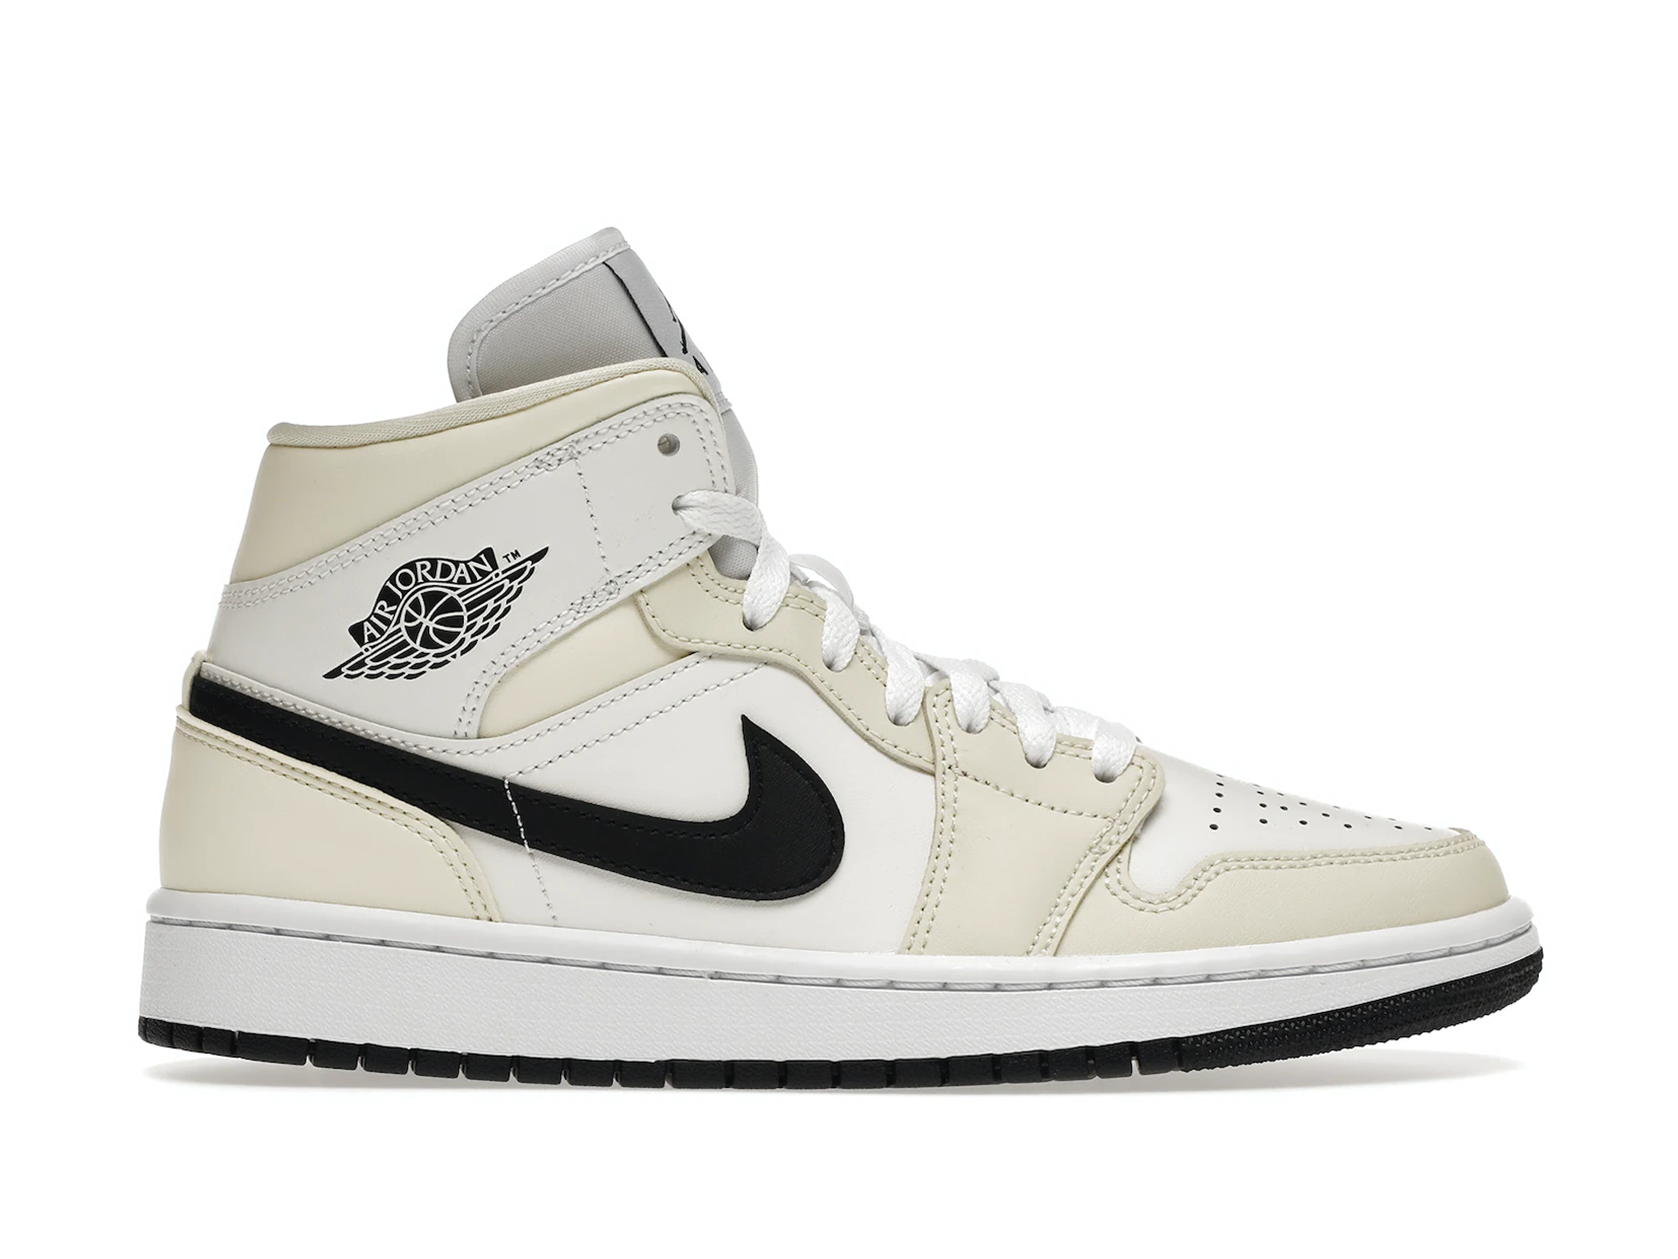 Double Boxed  139.99 Nike Air Jordan 1 Mid Coconut Milk (W) Double Boxed